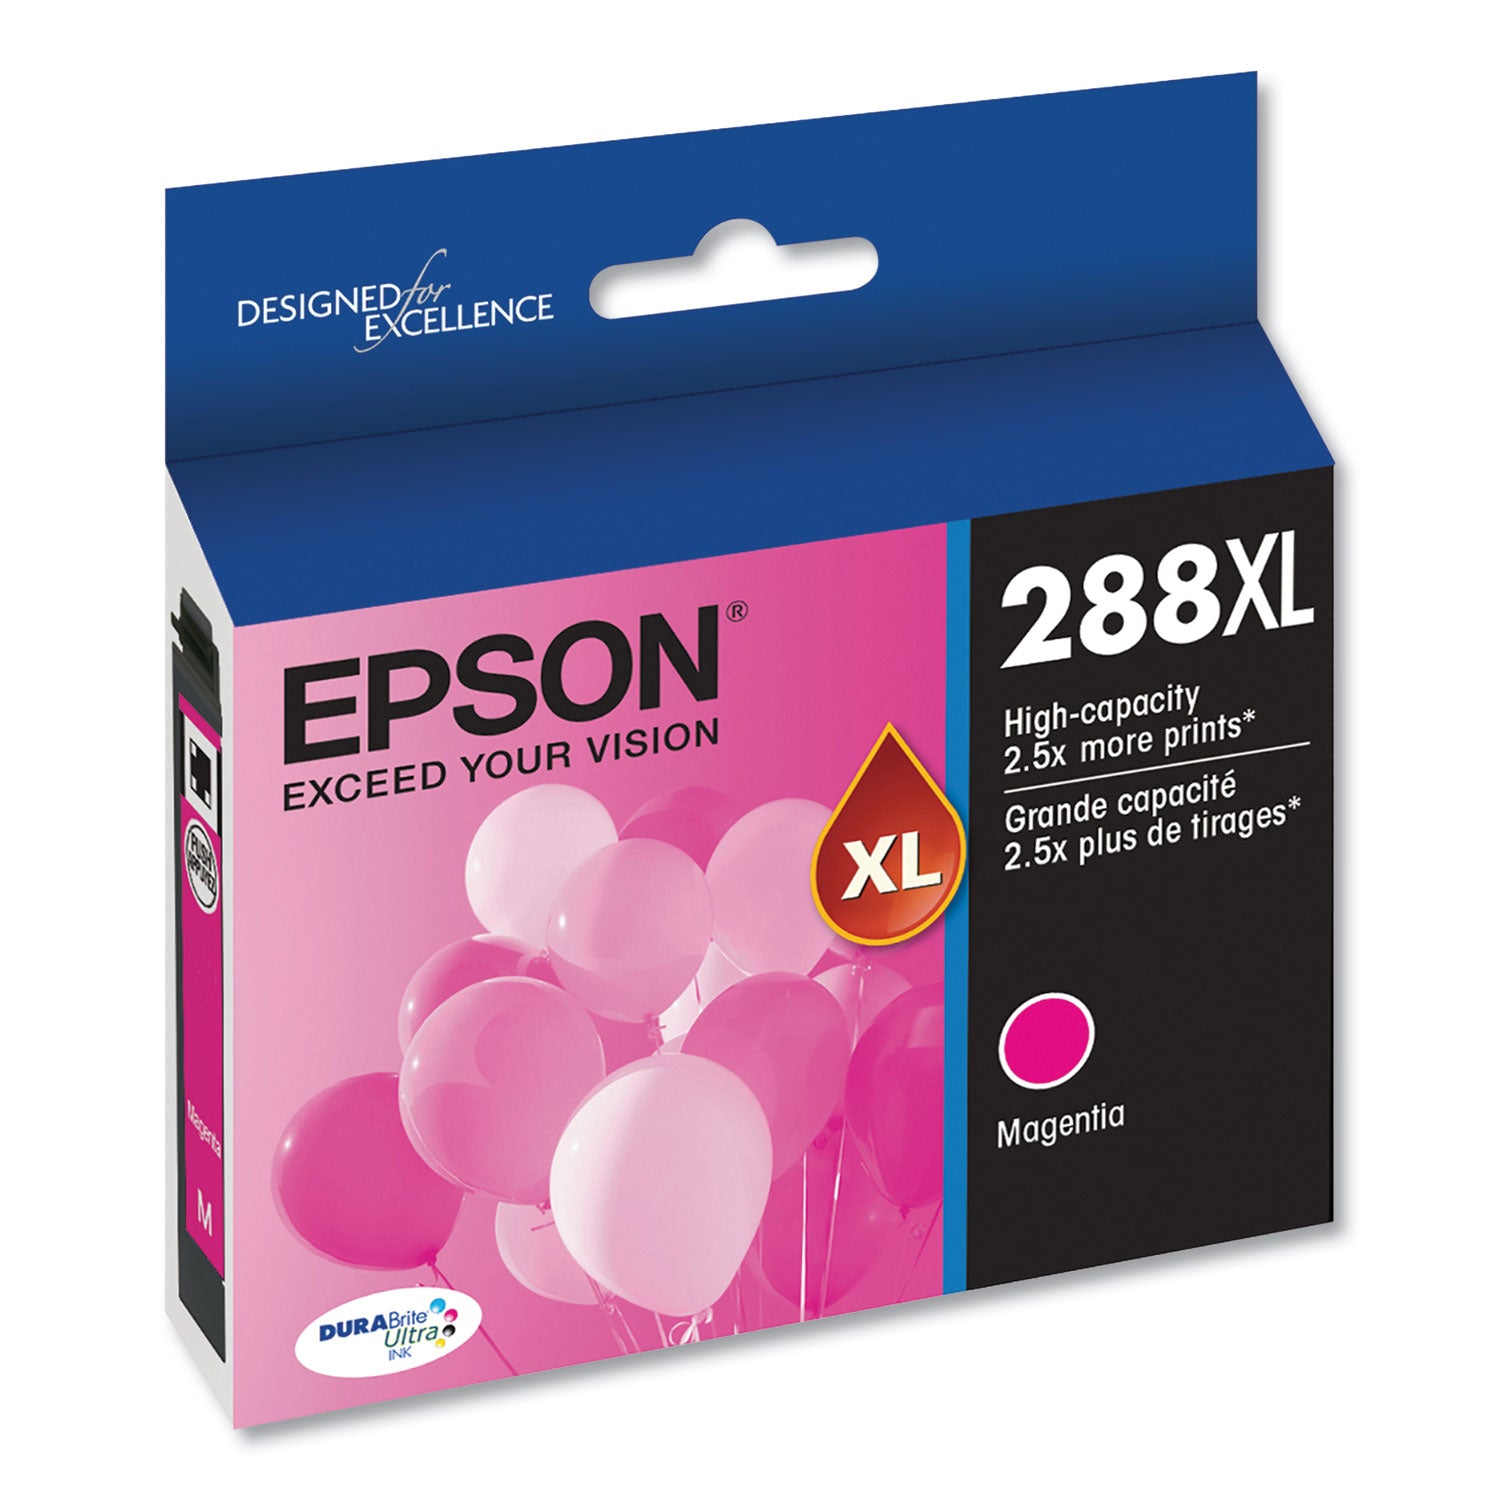 t288xl320-s-t288xl-durabrite-ultra-high-yield-ink-450-page-yield-magenta_epst288xl320s - 2